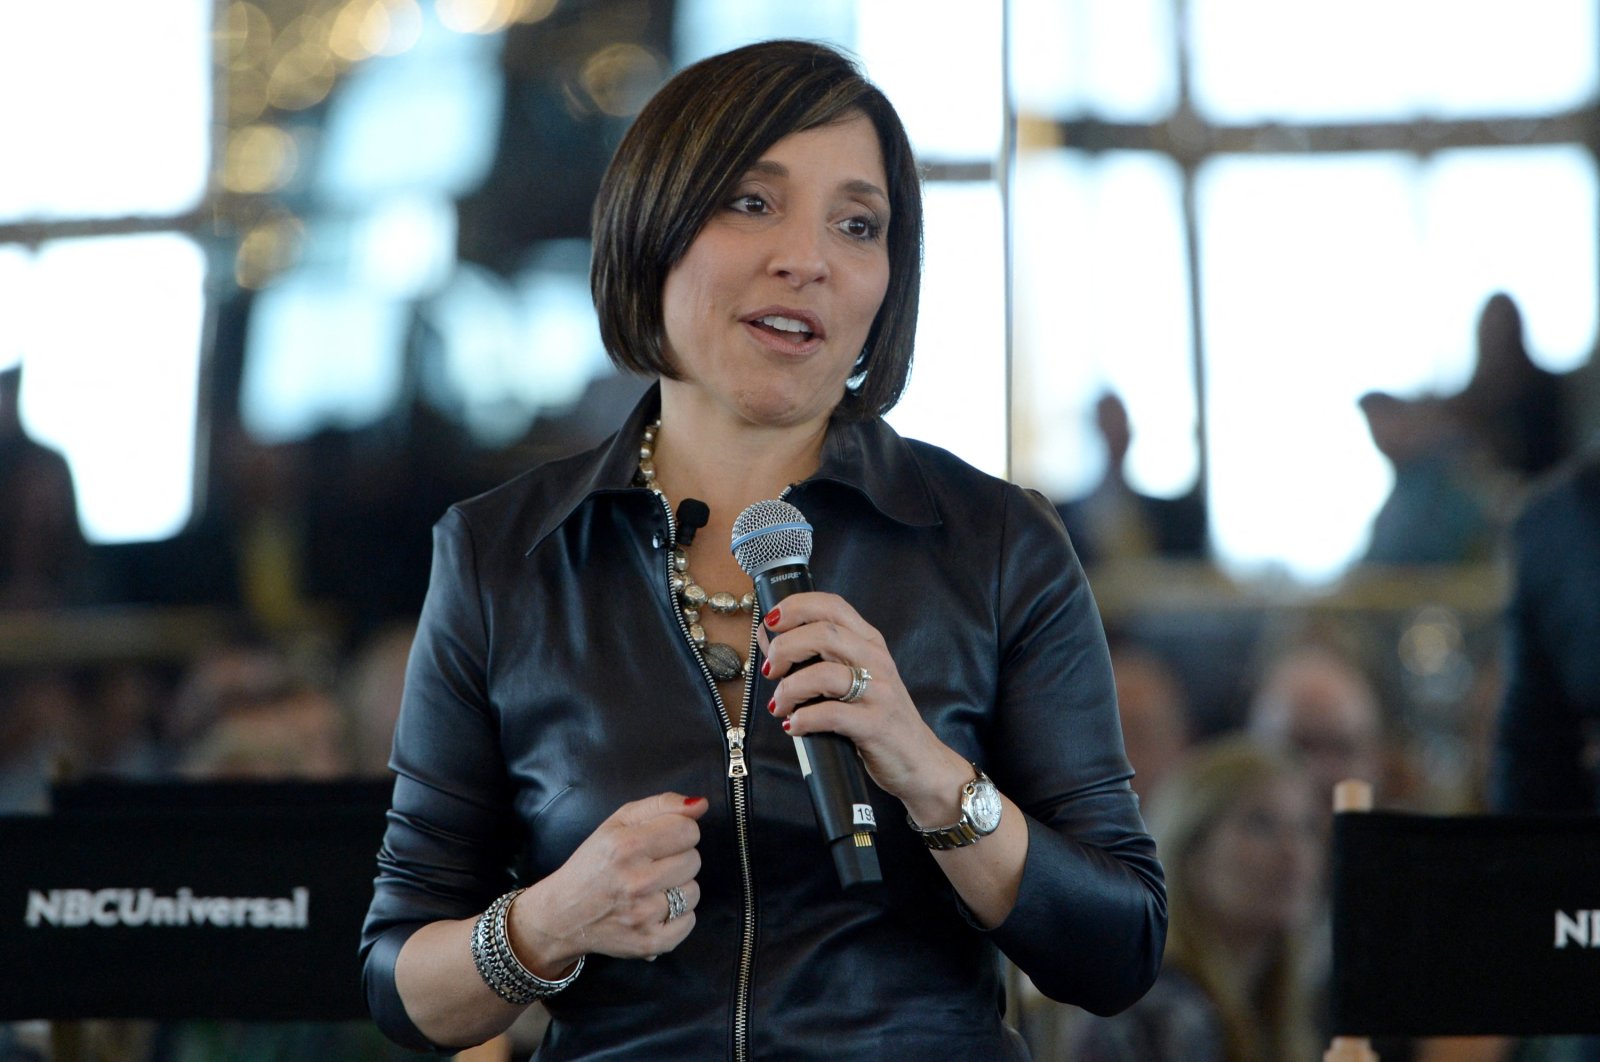 Advertising executive at NBCUniversal Linda Yaccarino speaks onstage at the Leadership Breakfast at Rainbow Room  Creating Quality Original Content panel presented by NBCUniversal during Advertising Week 2015 AWXII, Sept. 30, 2015, New York City, U.S. (AFP File Photo)